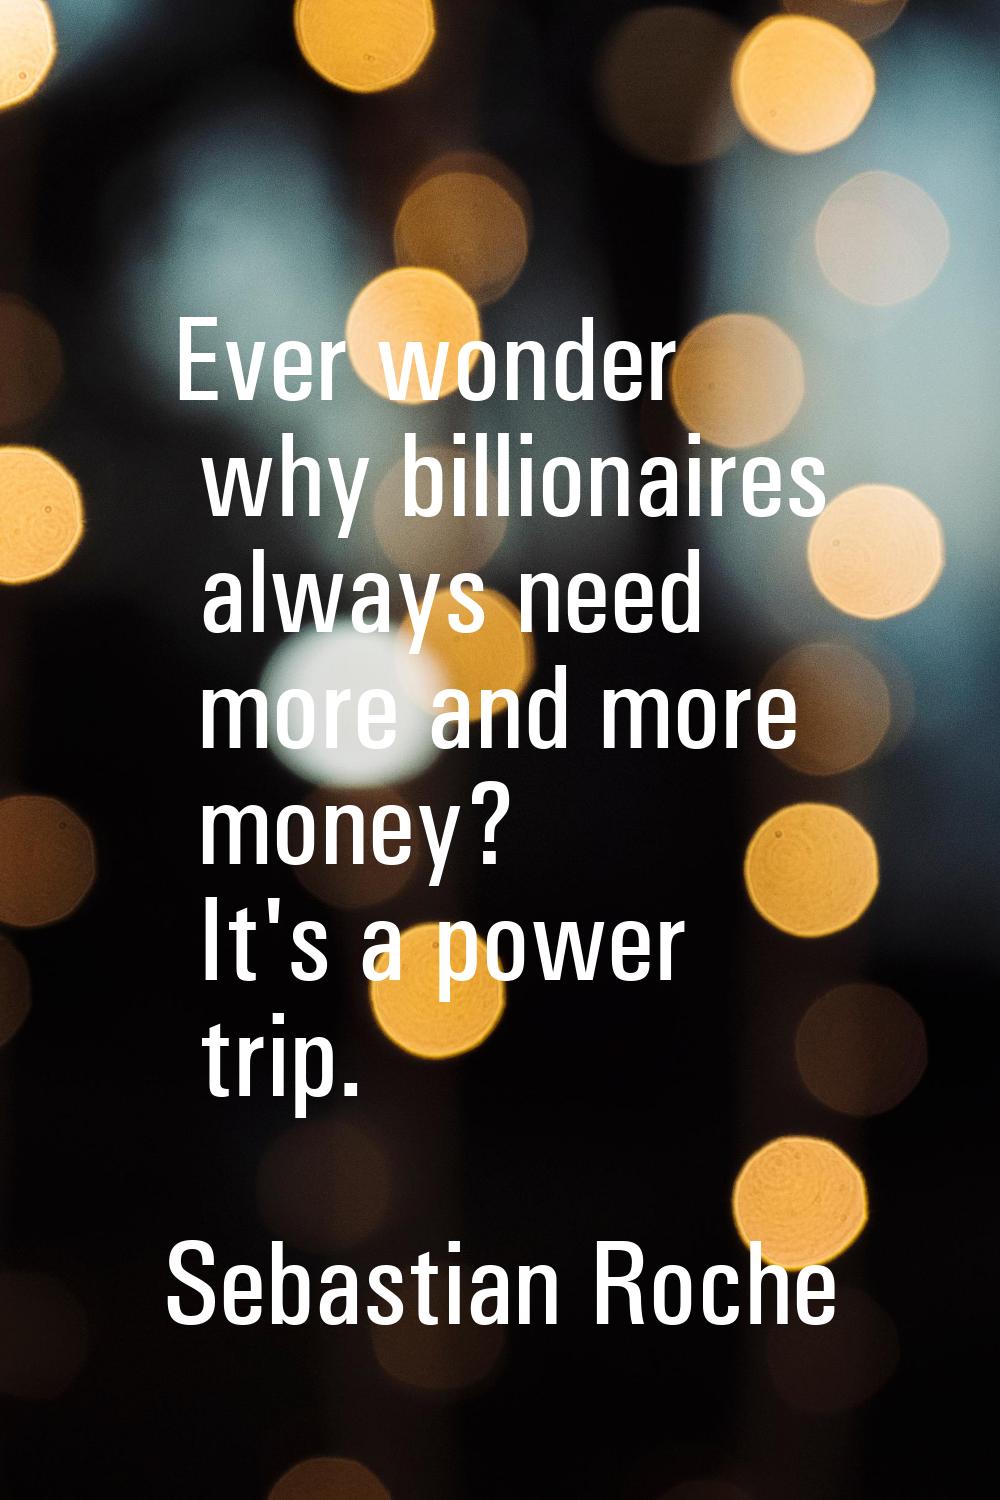 Ever wonder why billionaires always need more and more money? It's a power trip.